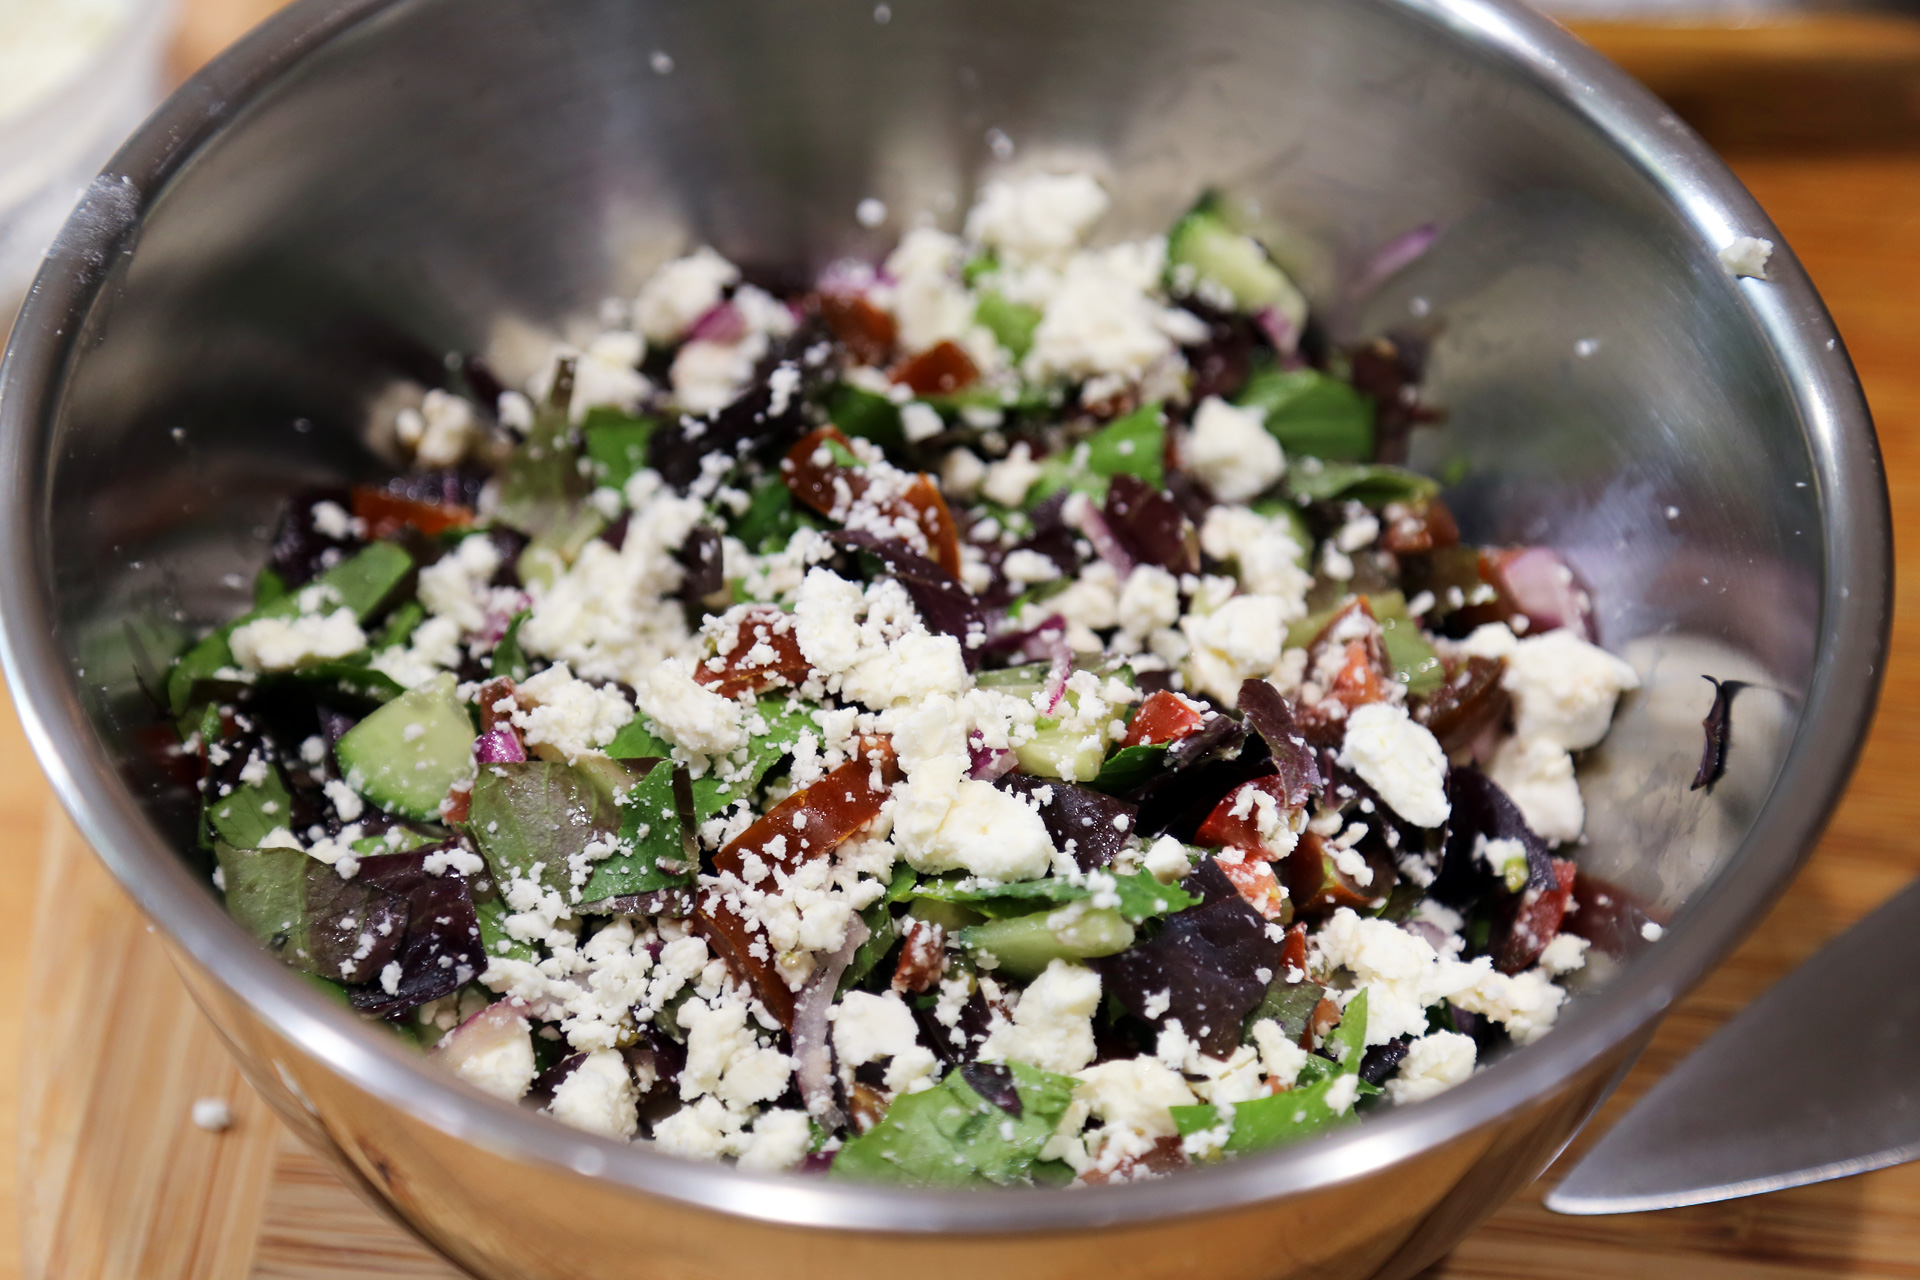 Toss together the lettuce, feta, cherry tomatoes, cucumber, and red onion.